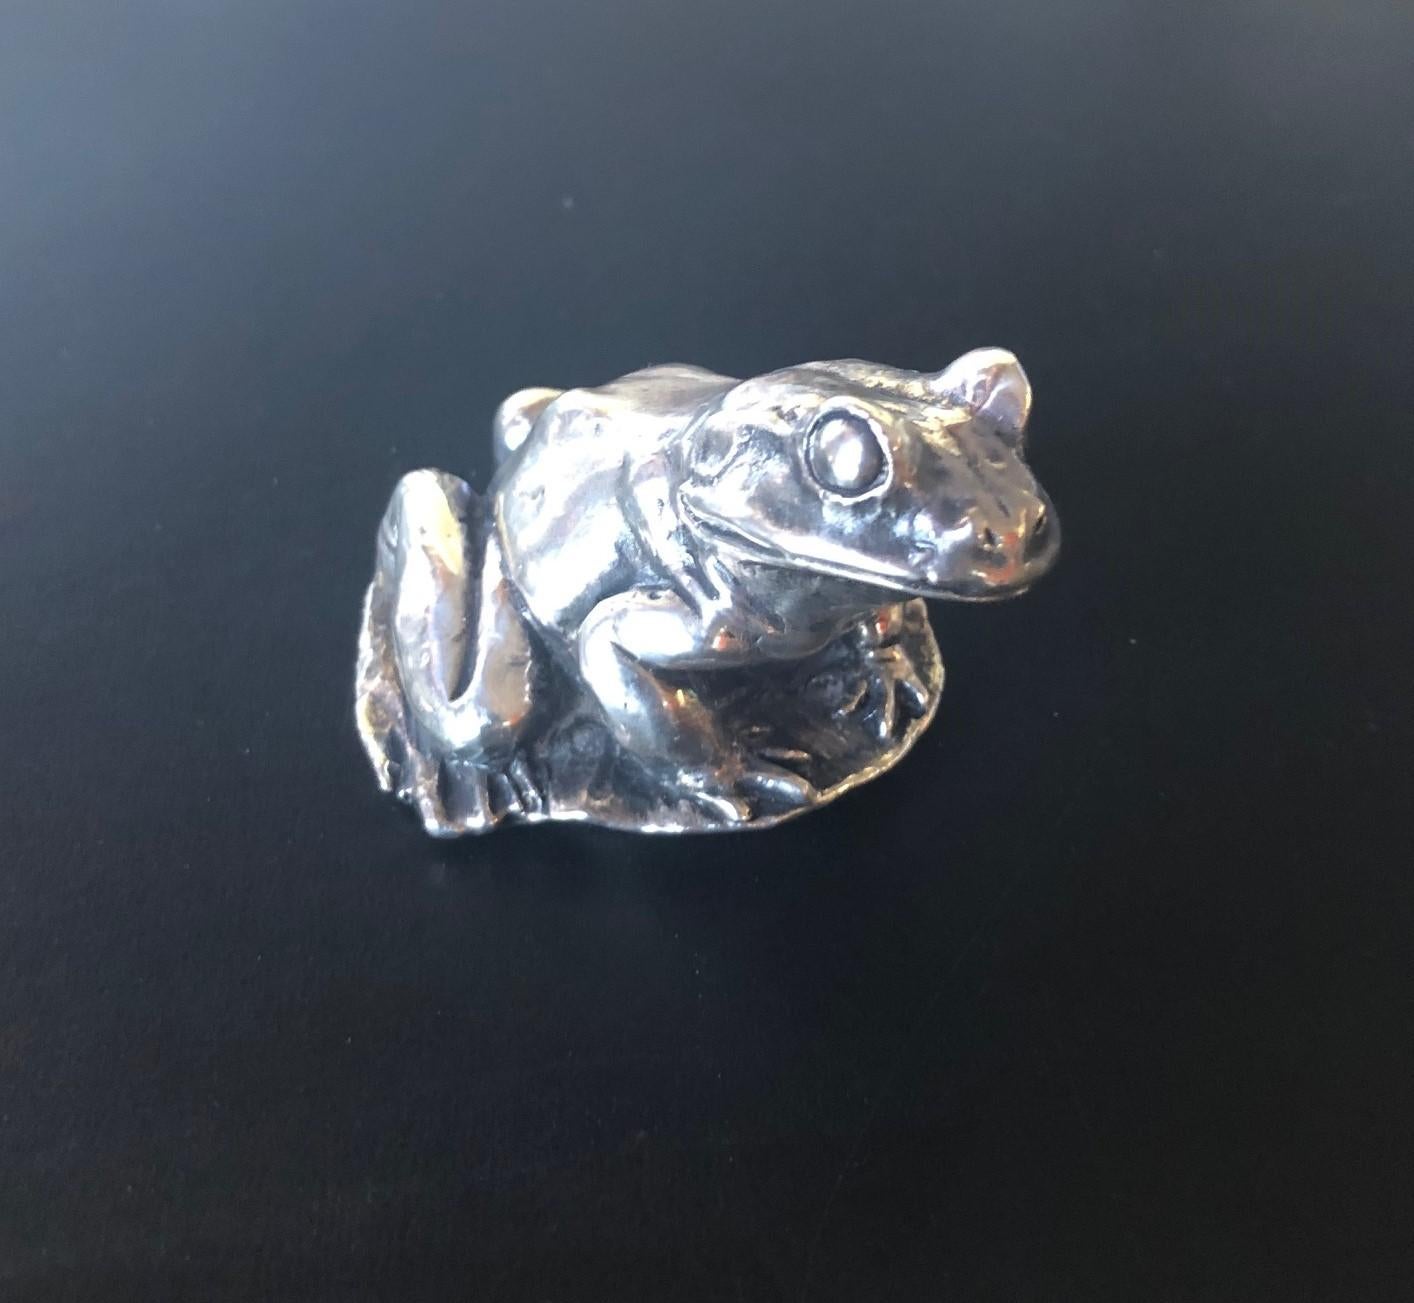 toad with silver teeth